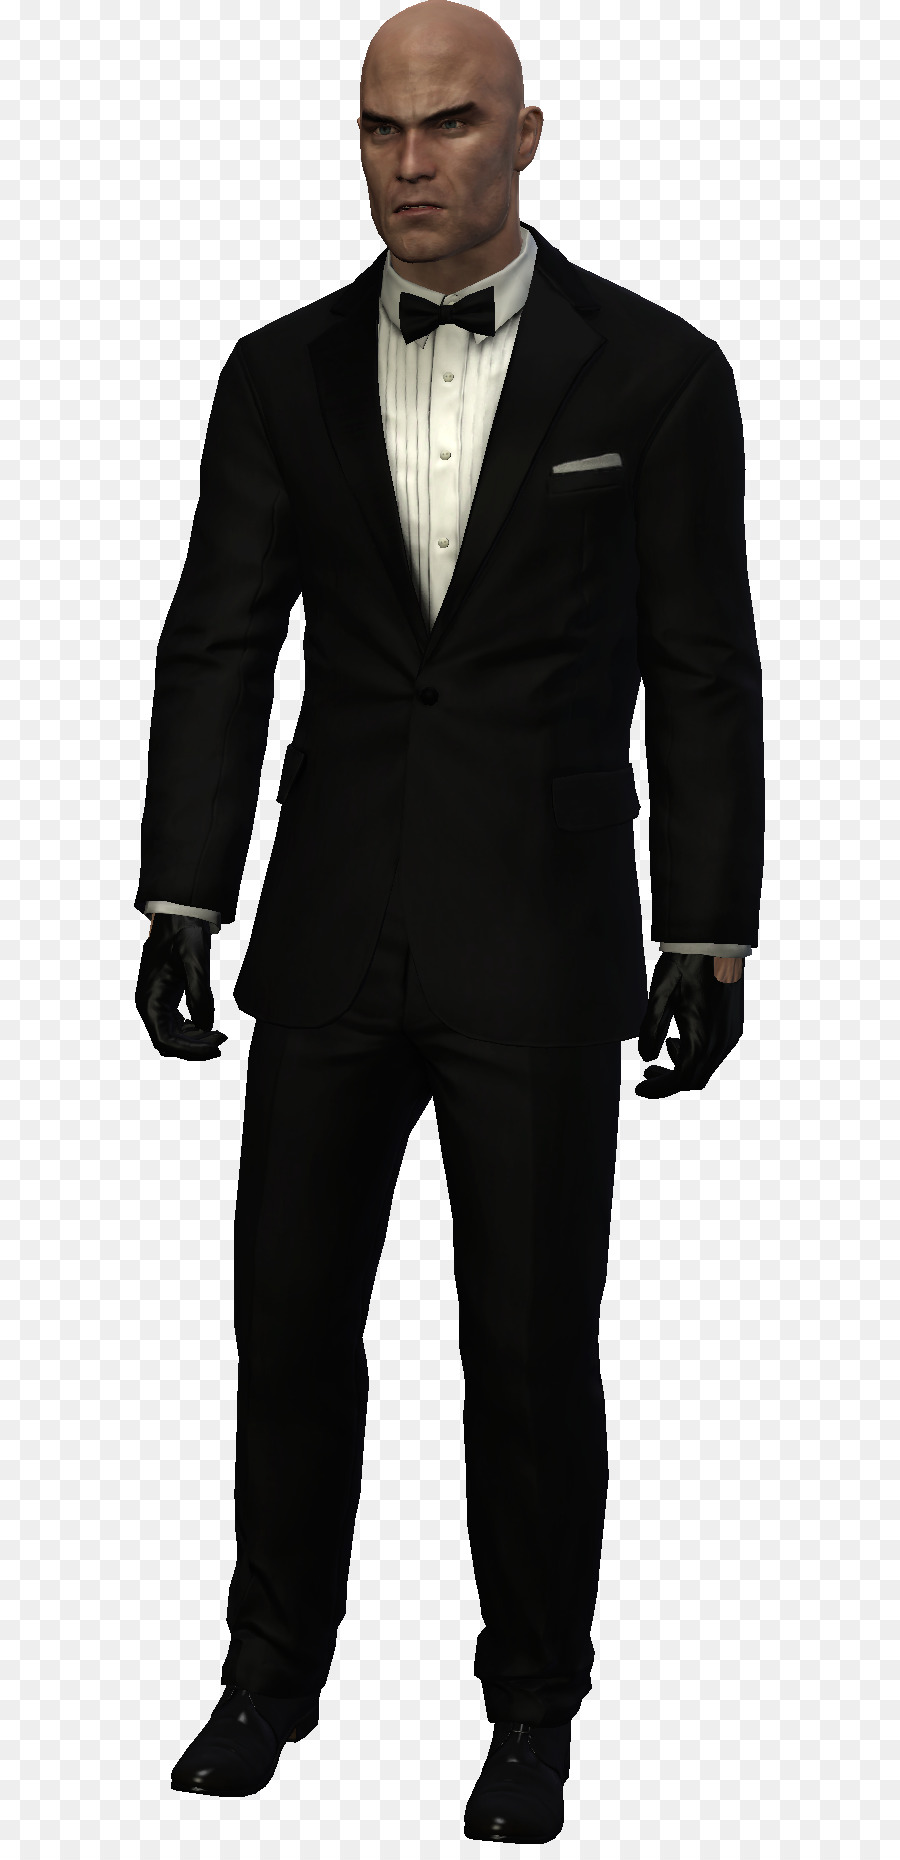 Hitman: Absolution Hitman: Agent 47 High roller - Hitman png download - 631*1844 - Free Transparent Hitman Absolution png Download.